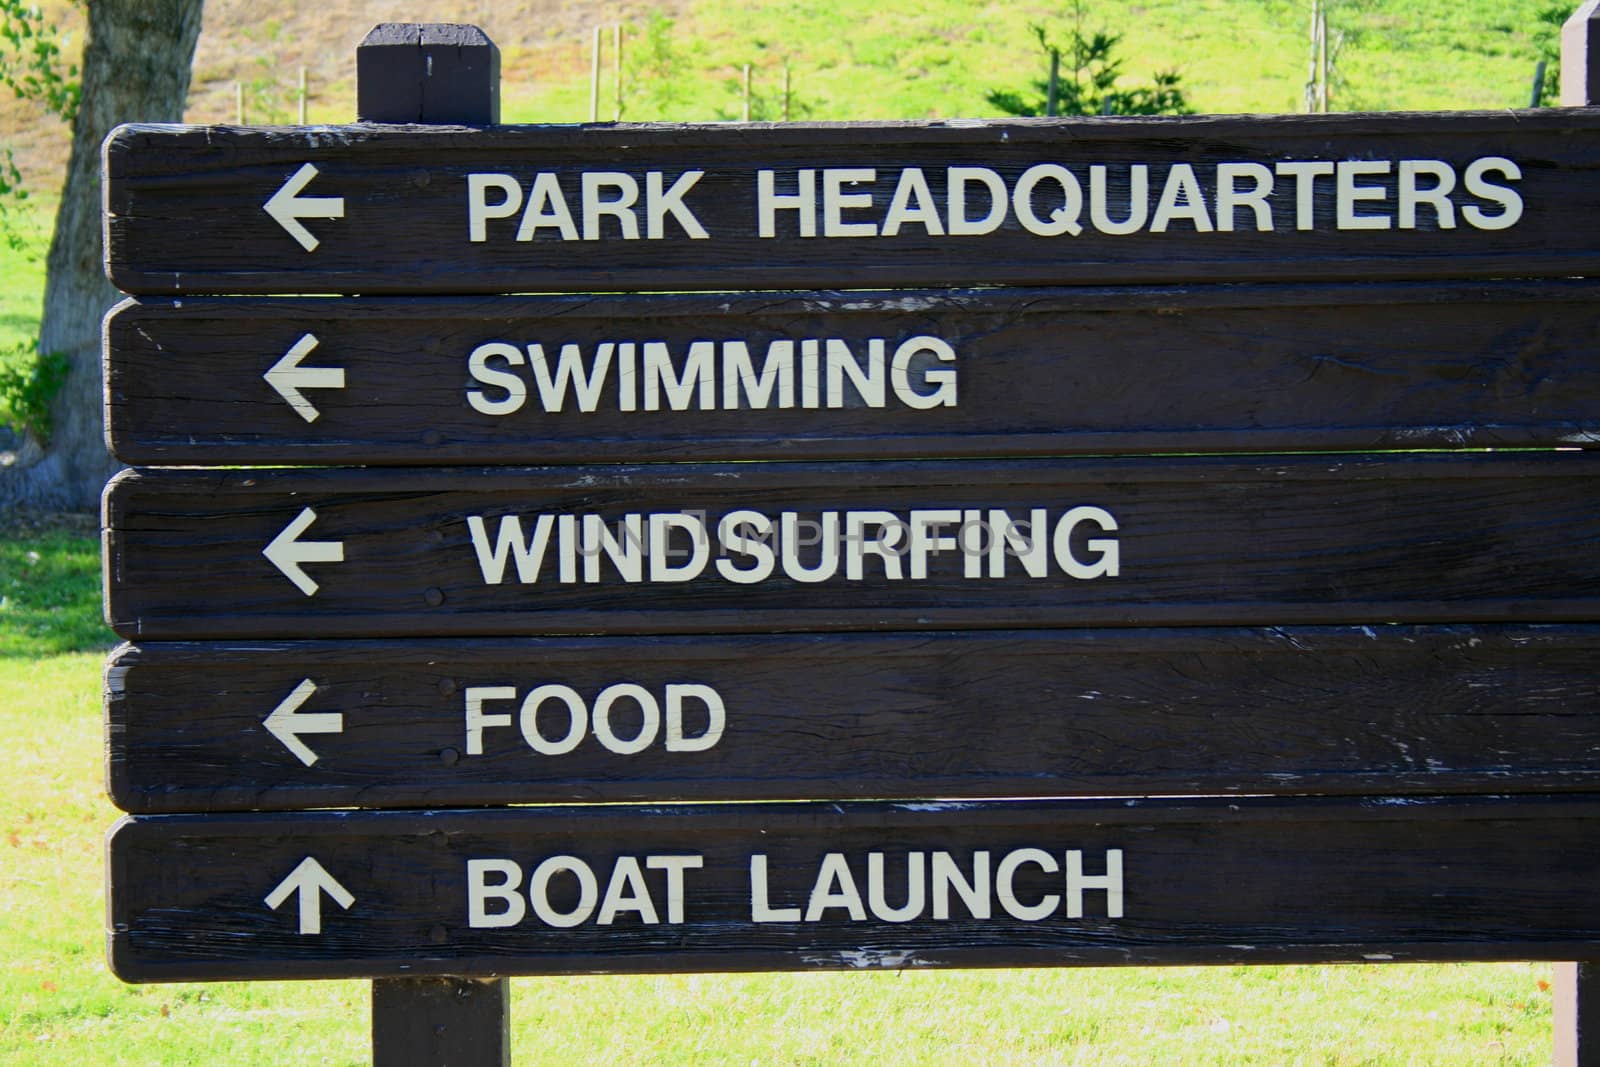 Park directions board close up on a sunny day.
